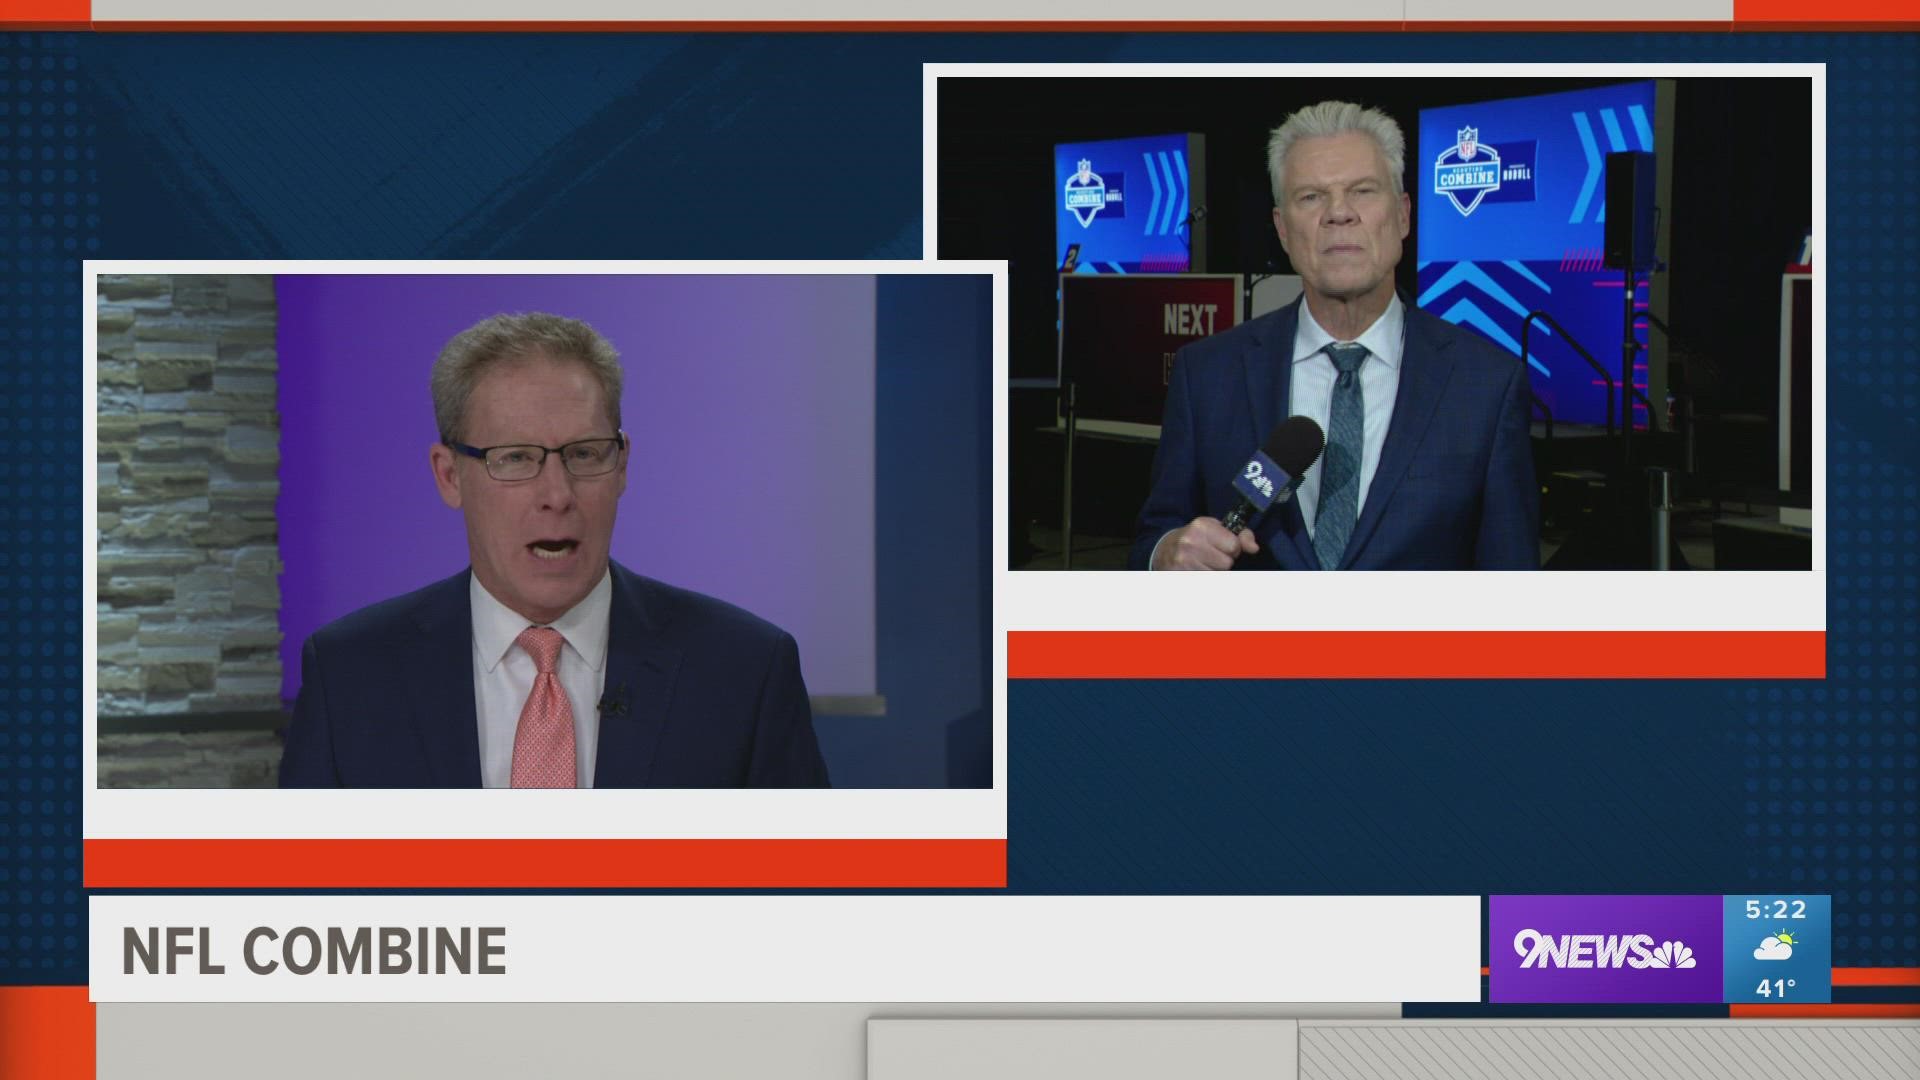 Mike Klis joins Rod Mackey live on 9NEWS from the NFL Combine in Indianapolis to discuss the latest surrounding the Denver Broncos.